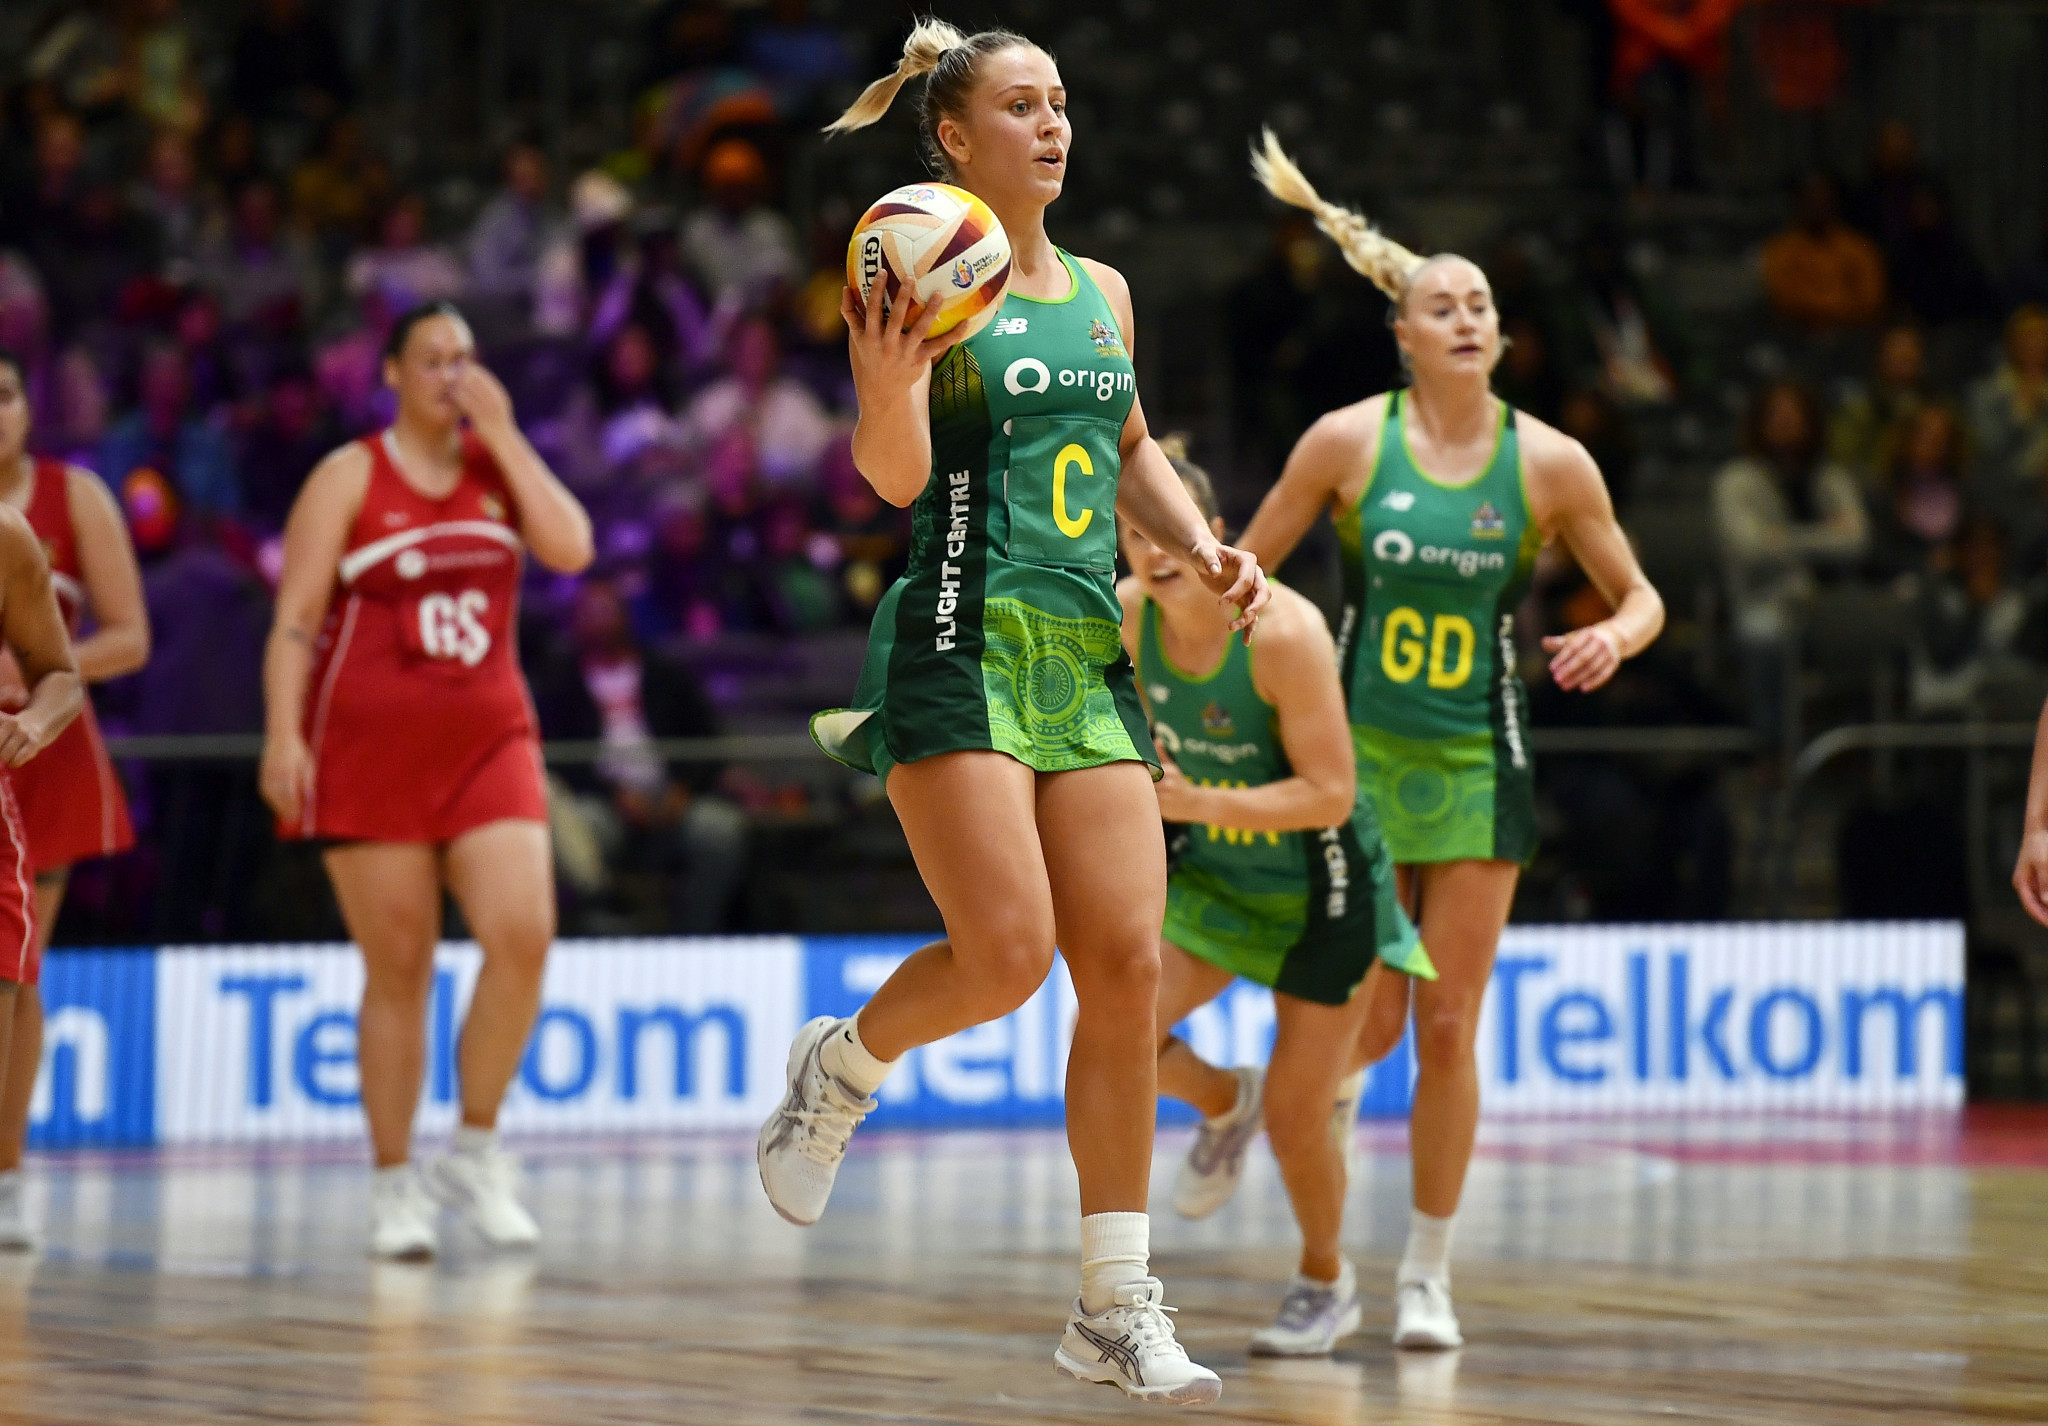 Australia continued to impress at the Netball World Cup with a comprehensive 85-38 victory against Wales ©Getty Images